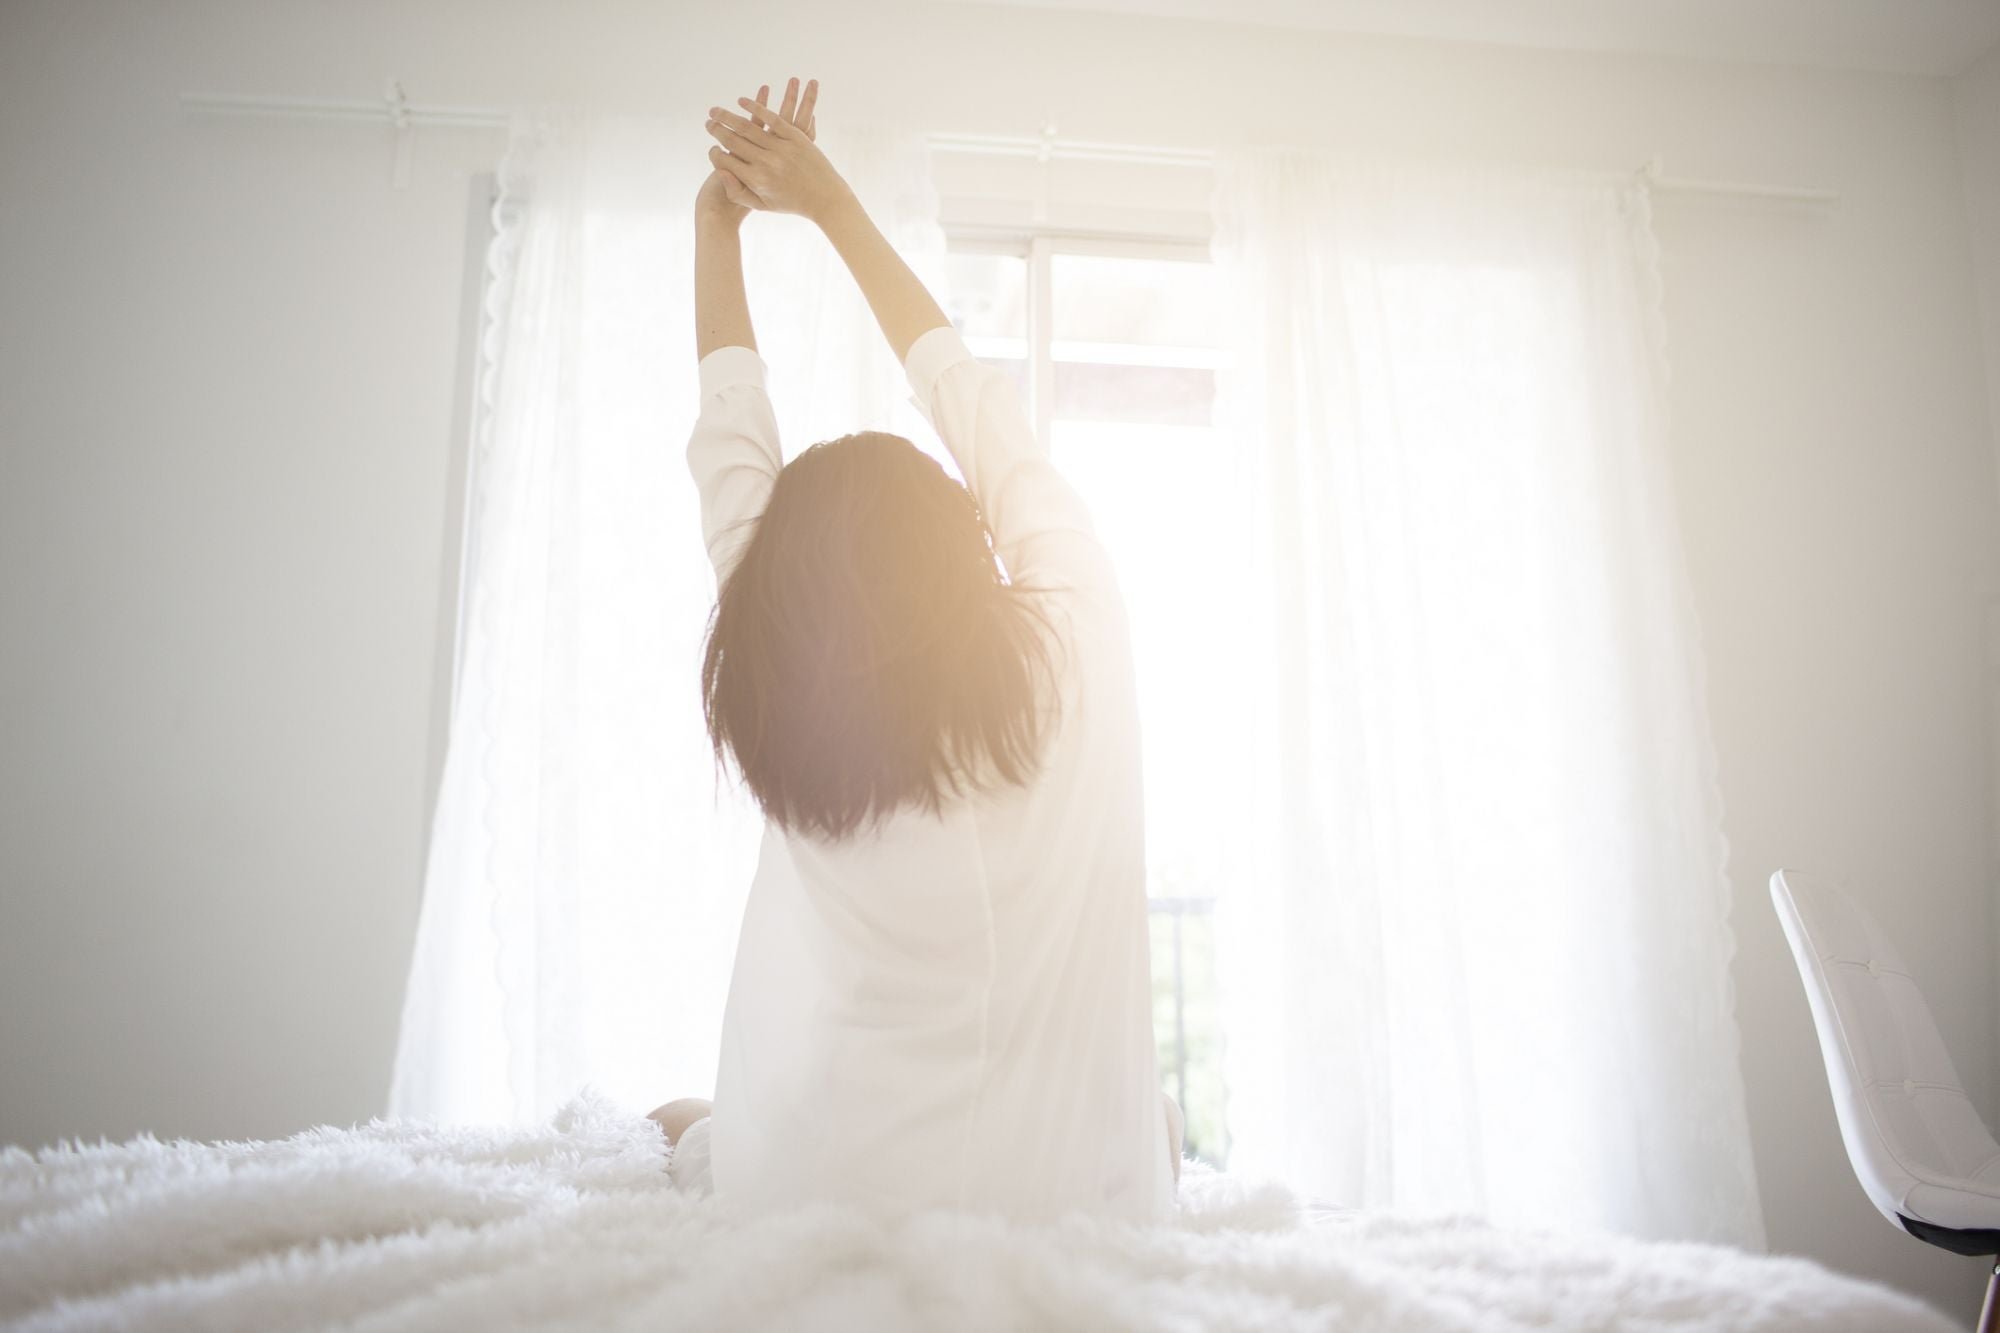 Getting a Good Night's Sleep Starts These 4 Morning Habits